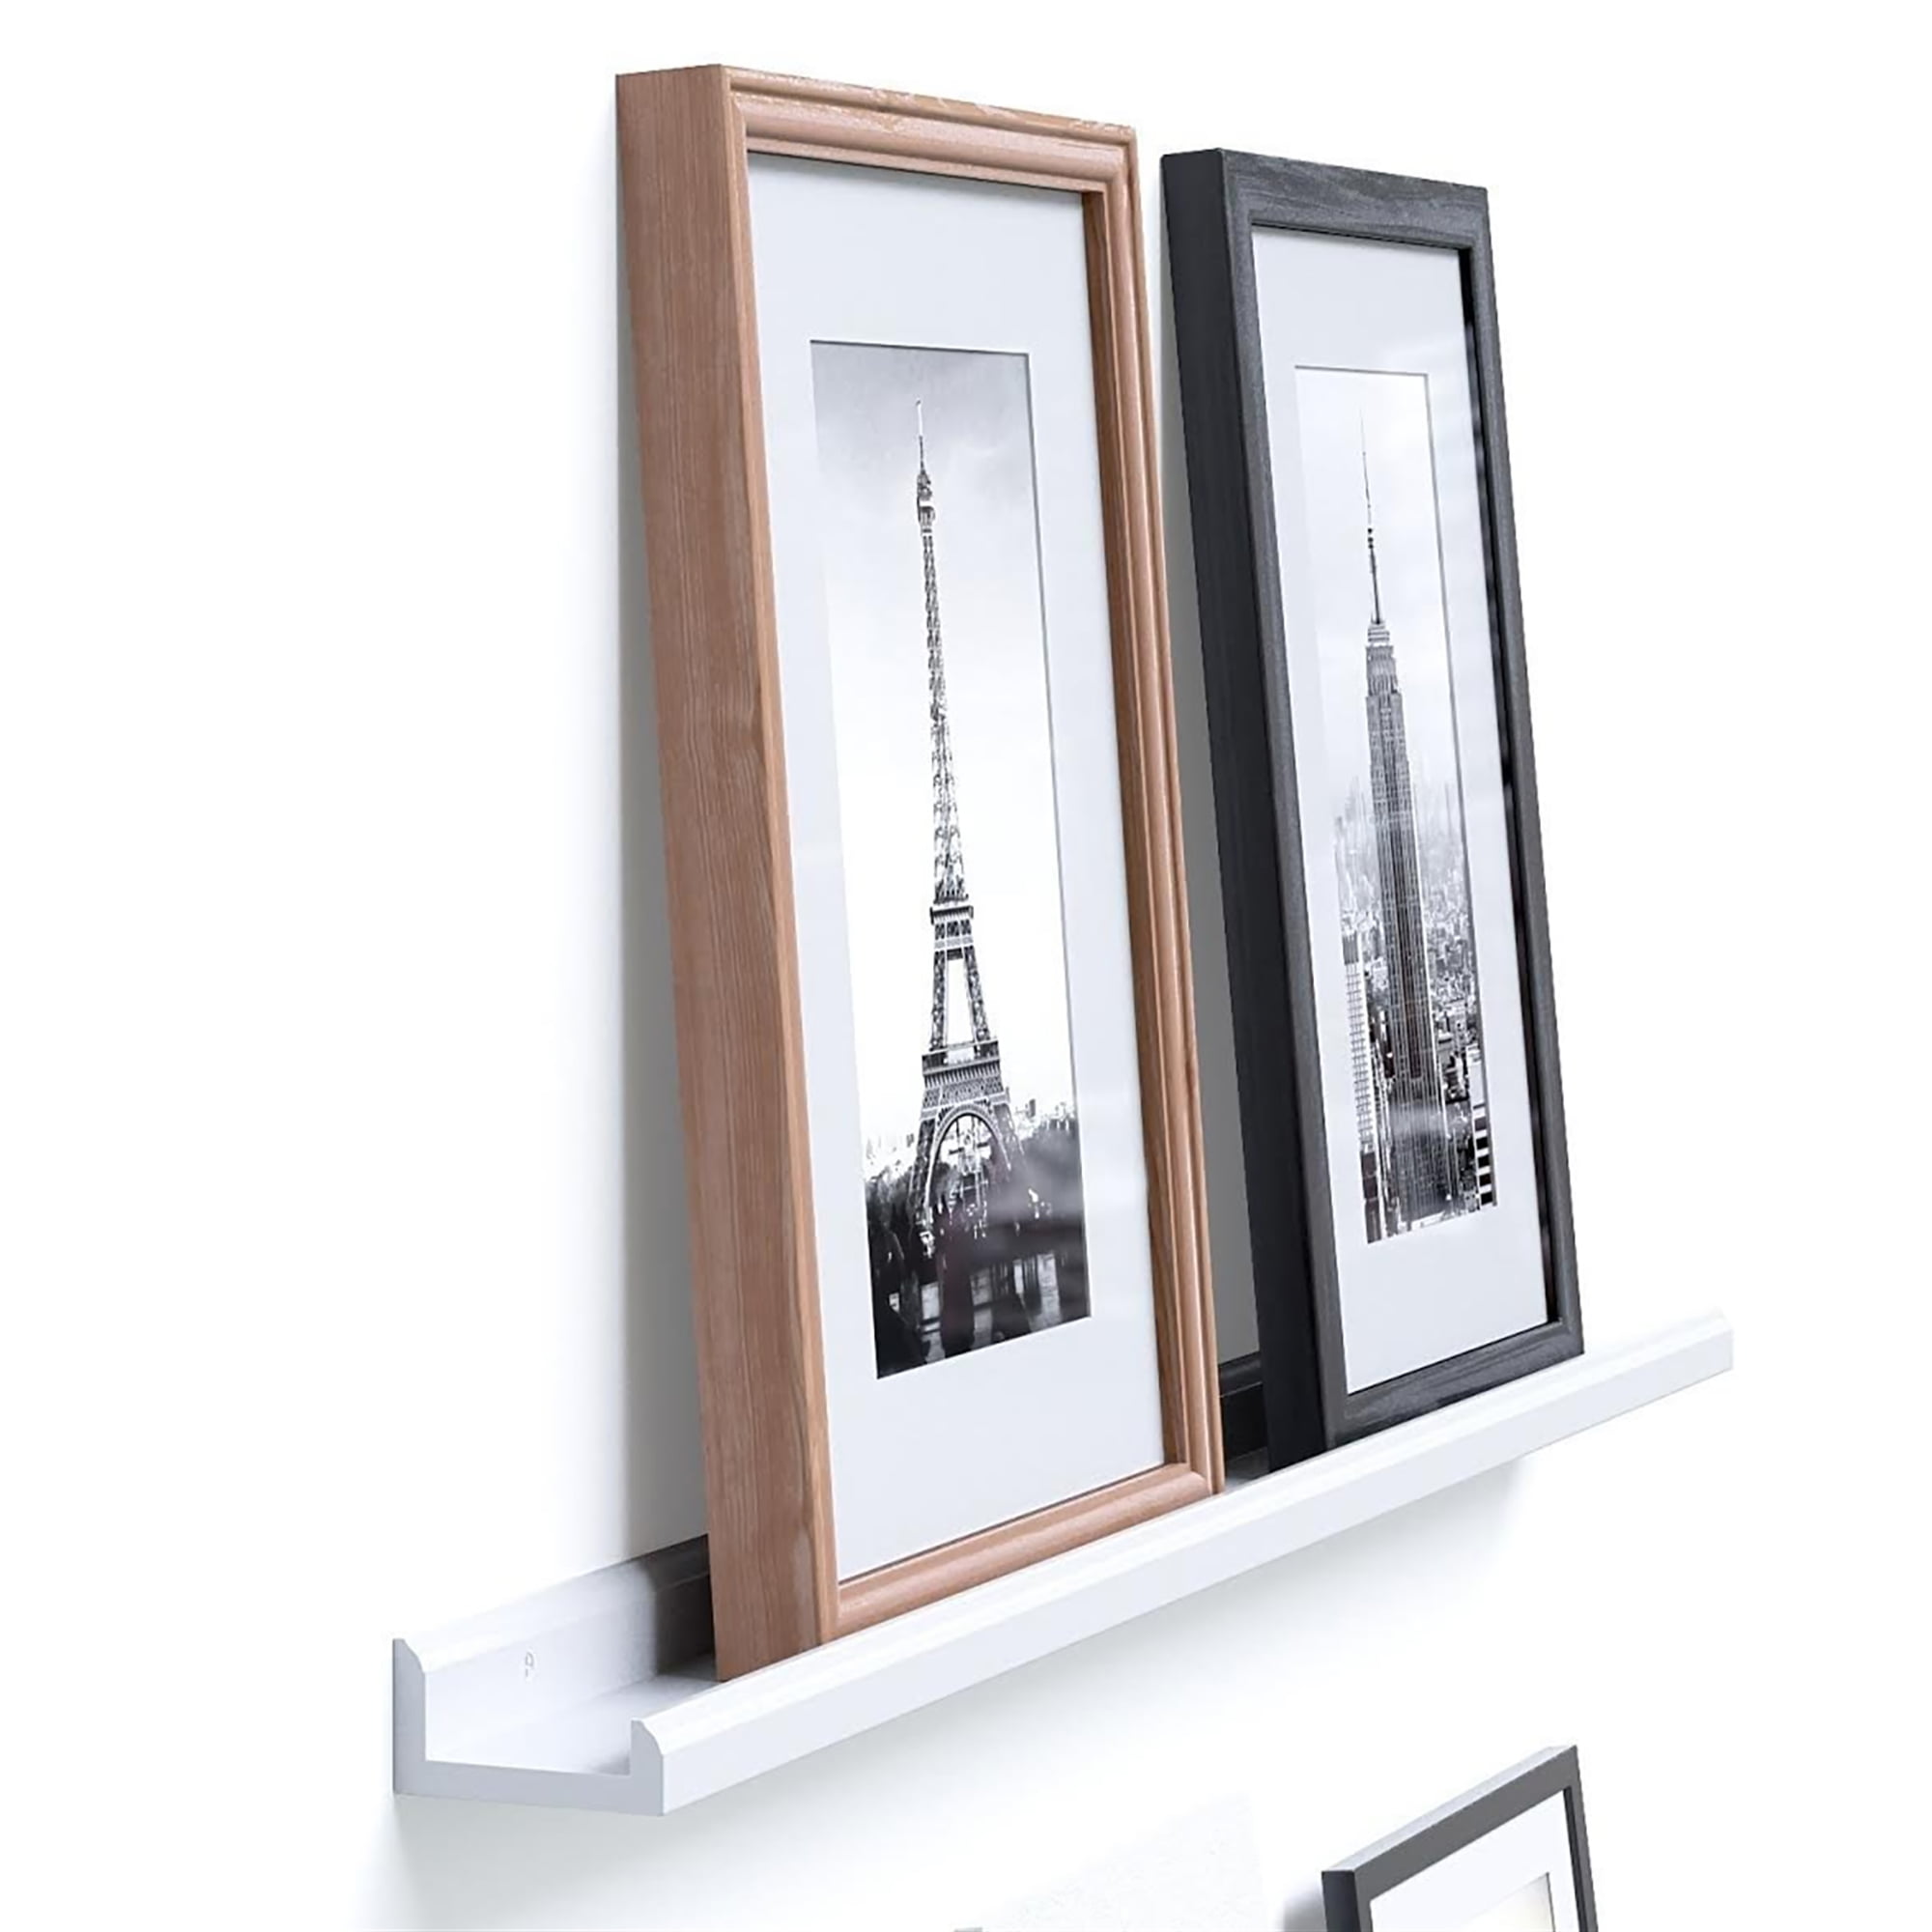 US 14/23/46 inch Home Floating Picture Display Ledge Wall Mount Shelf Modern 